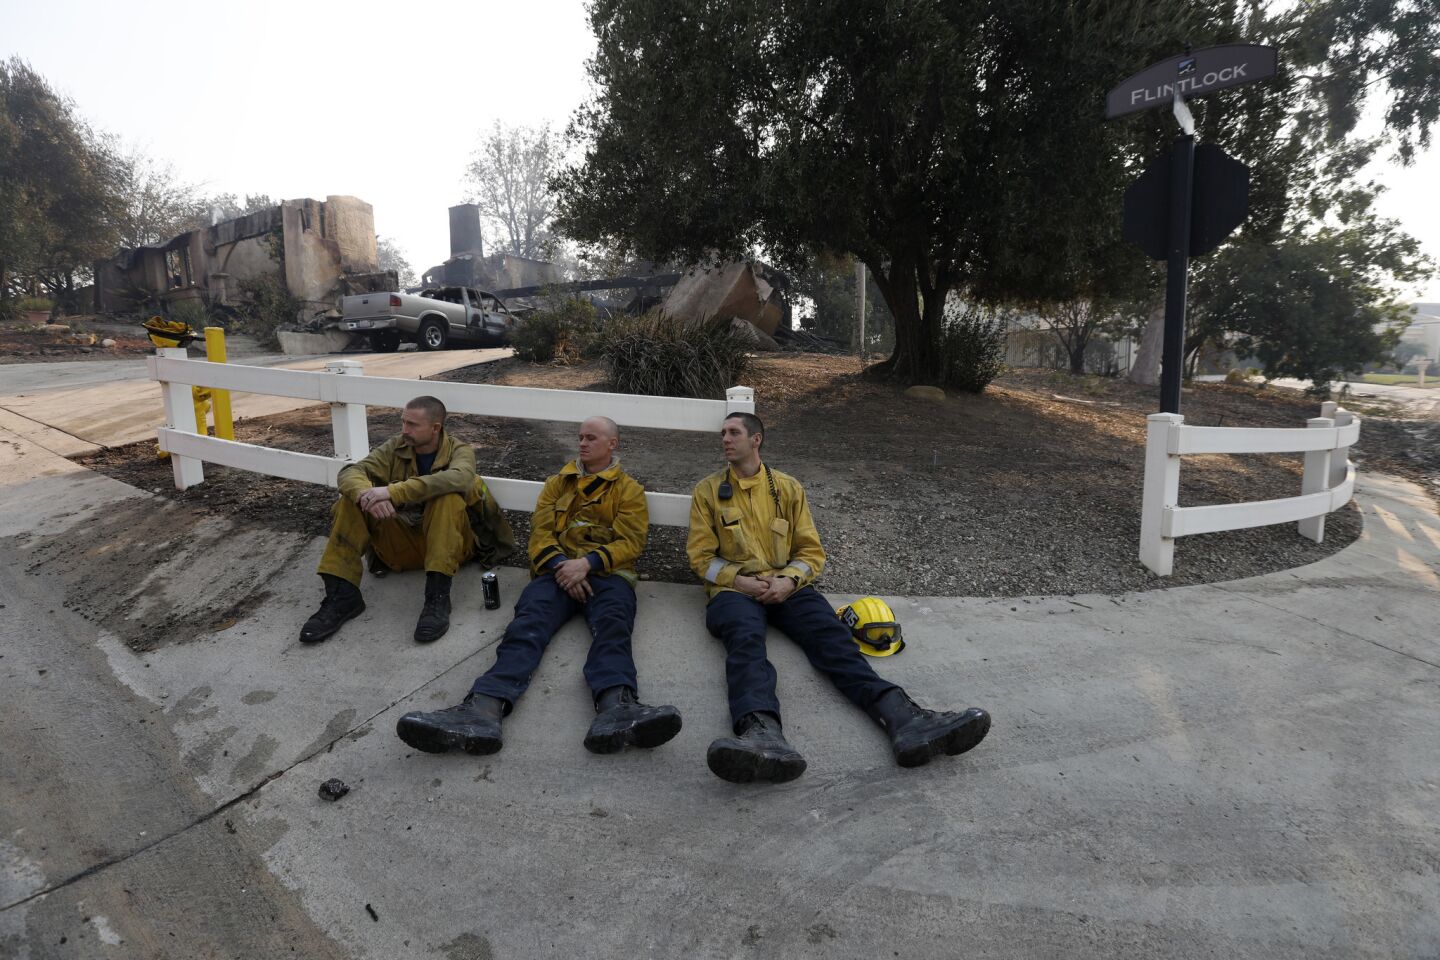 Los Angeles firefighters Ryan Miller, left, Justin Randolph and Kobe Sallstrom grab some brief rest at the corner of Flintlock Lane and Silver Spur Lane in Bell Canyon on Saturday.